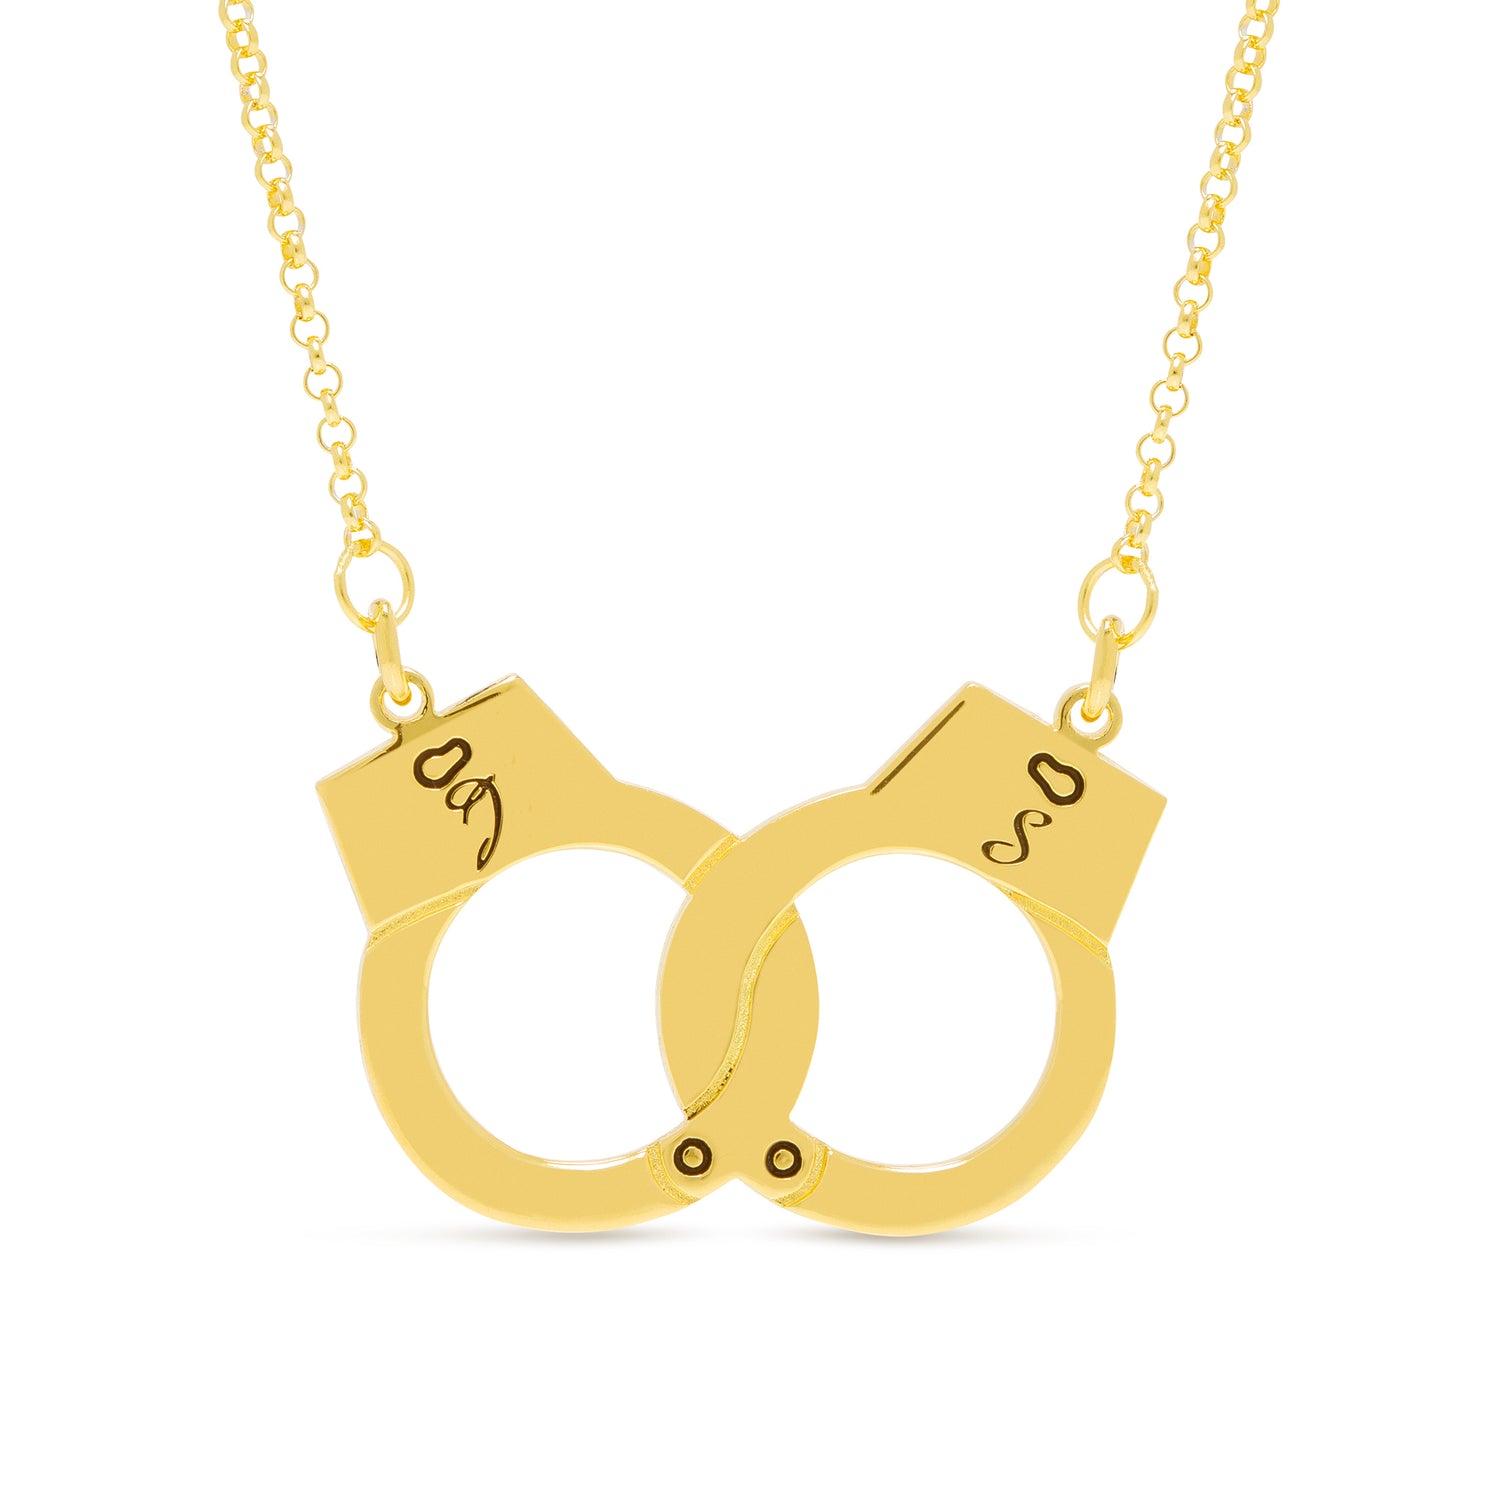 Handcuff Initial Necklace